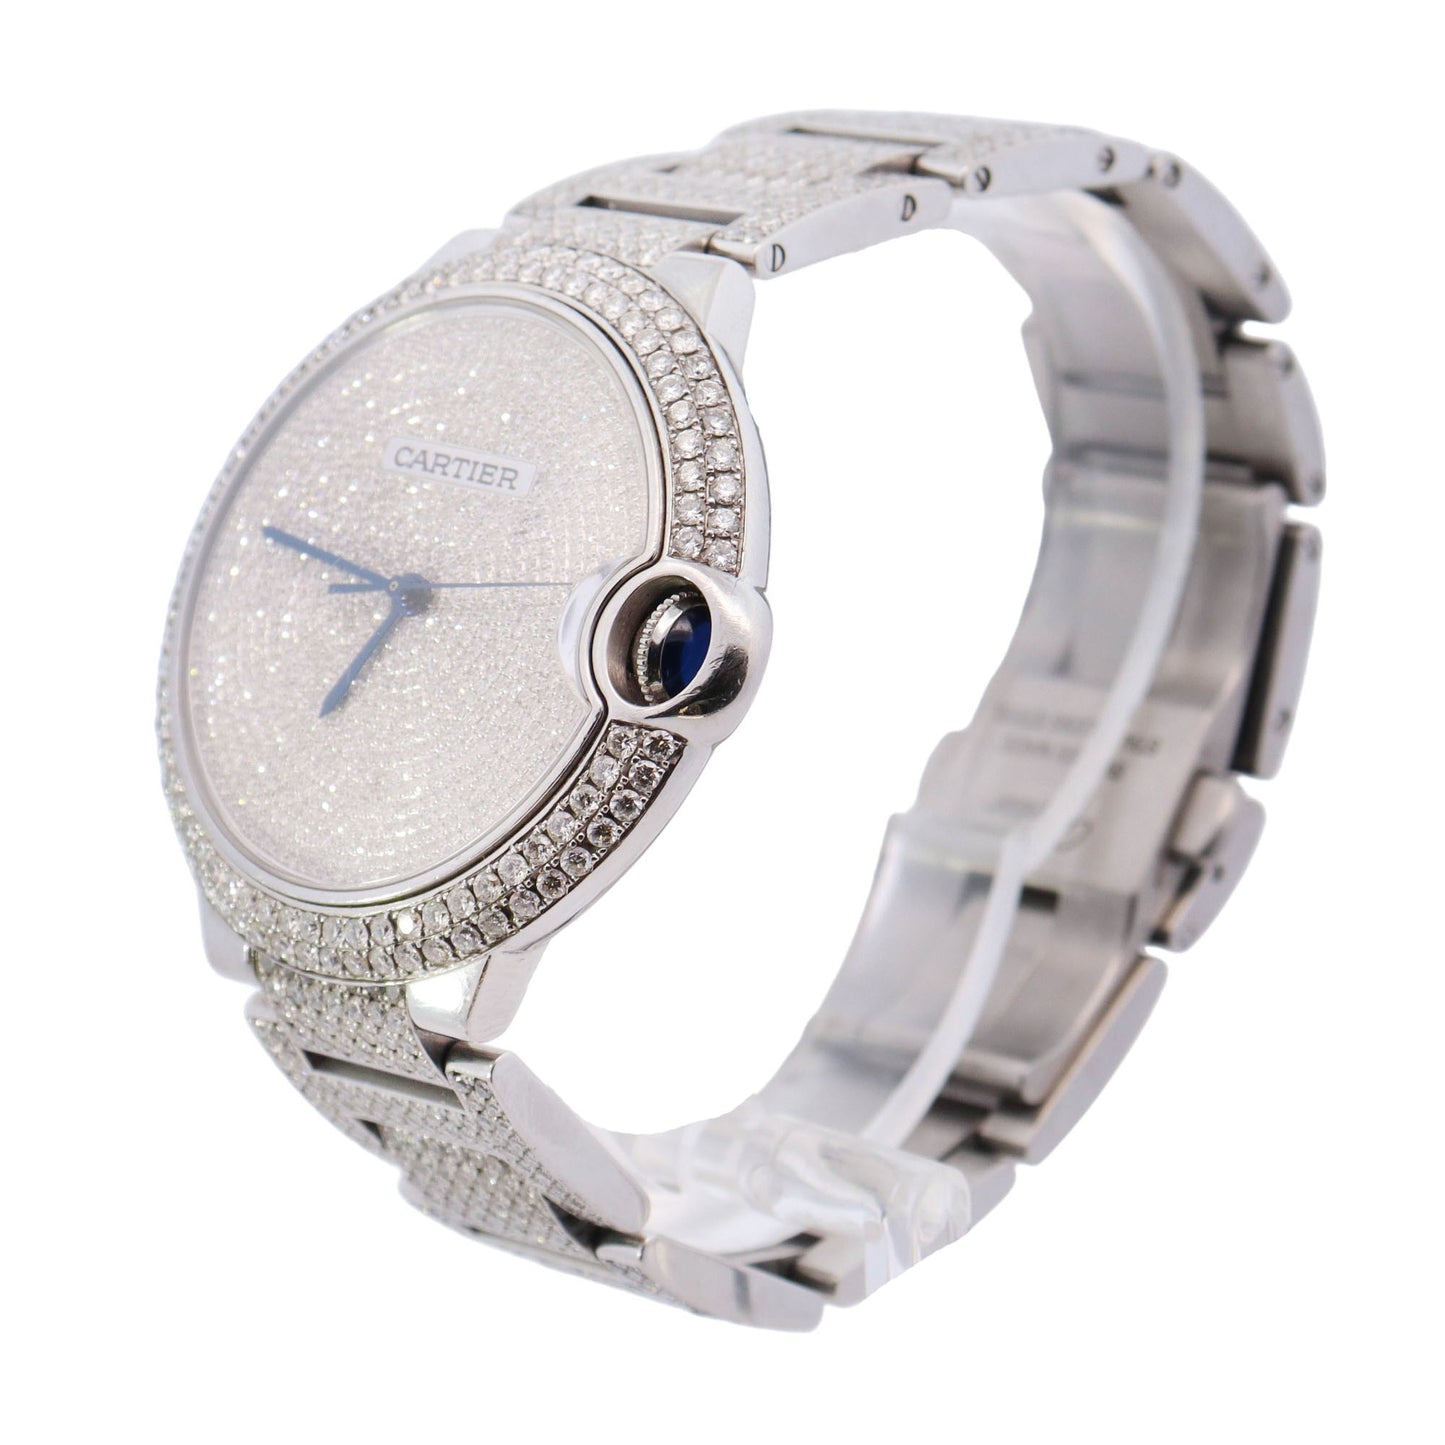 Cartier Ballon Bleu Stainless Steel 42mm Custom Pave Dial Watch Reference #: W69012Z4